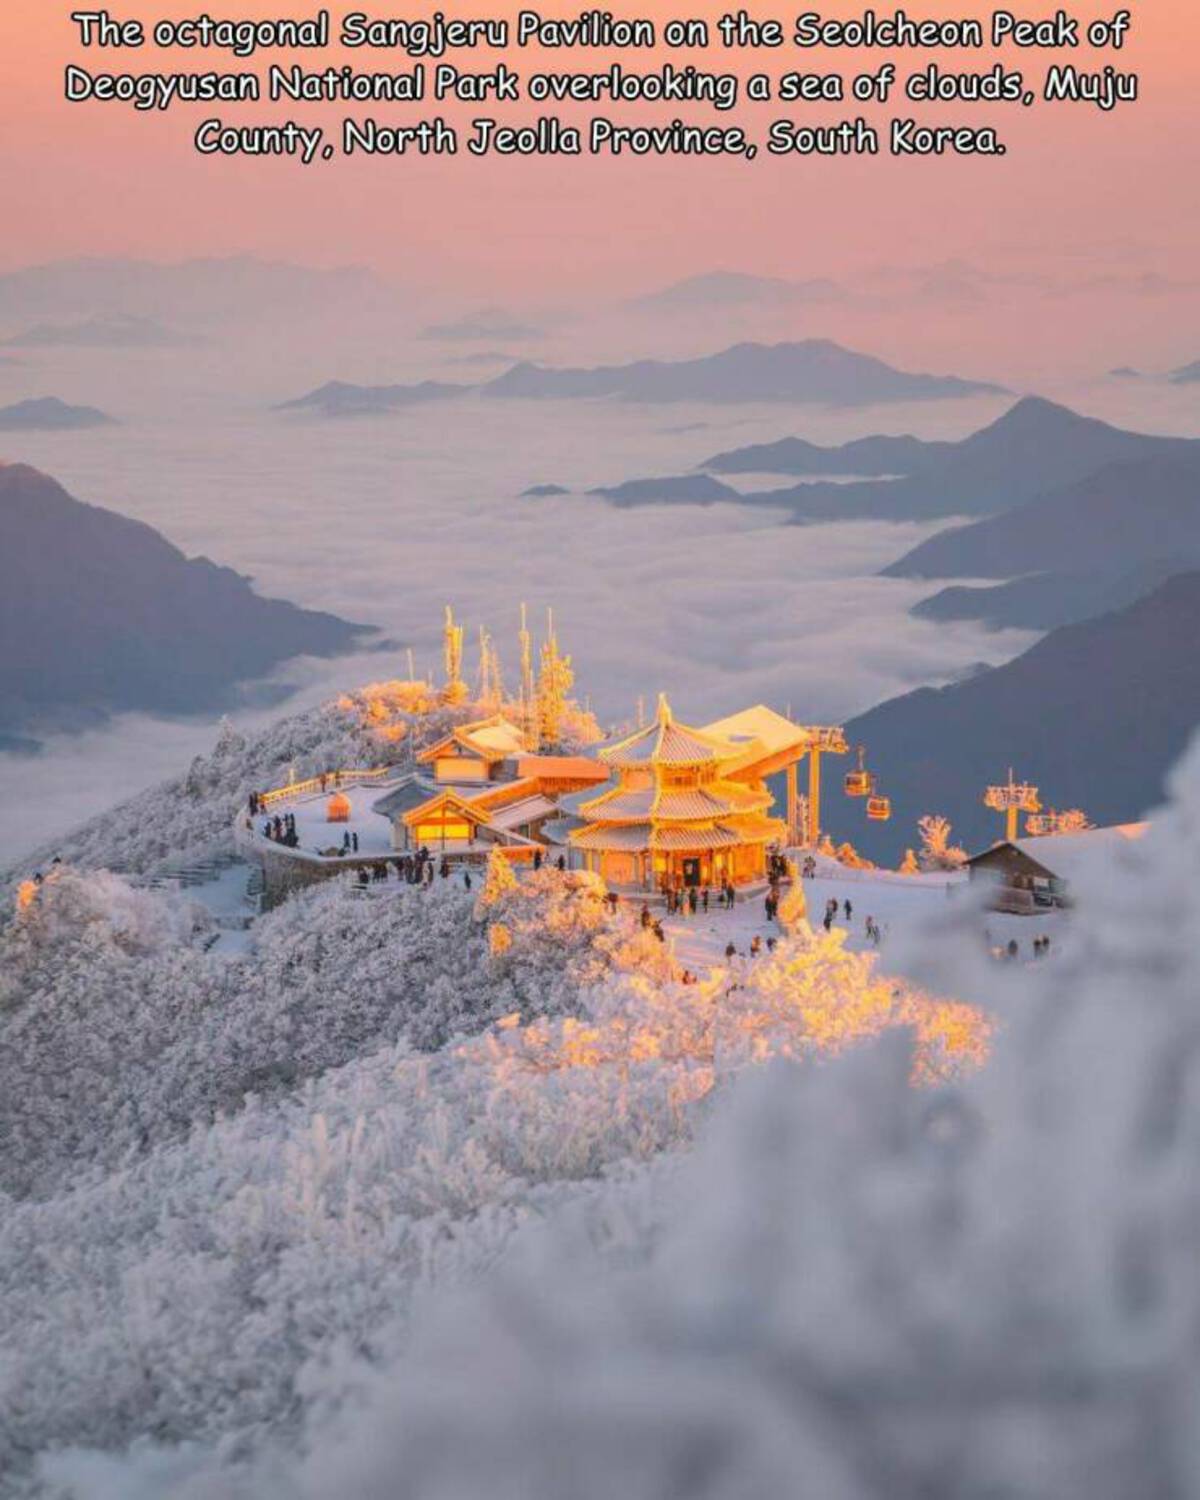 sky - The octagonal Sangjeru Pavilion on the Seolcheon Peak of Deogyusan National Park overlooking a sea of clouds, Muju County, North Jeolla Province, South Korea.